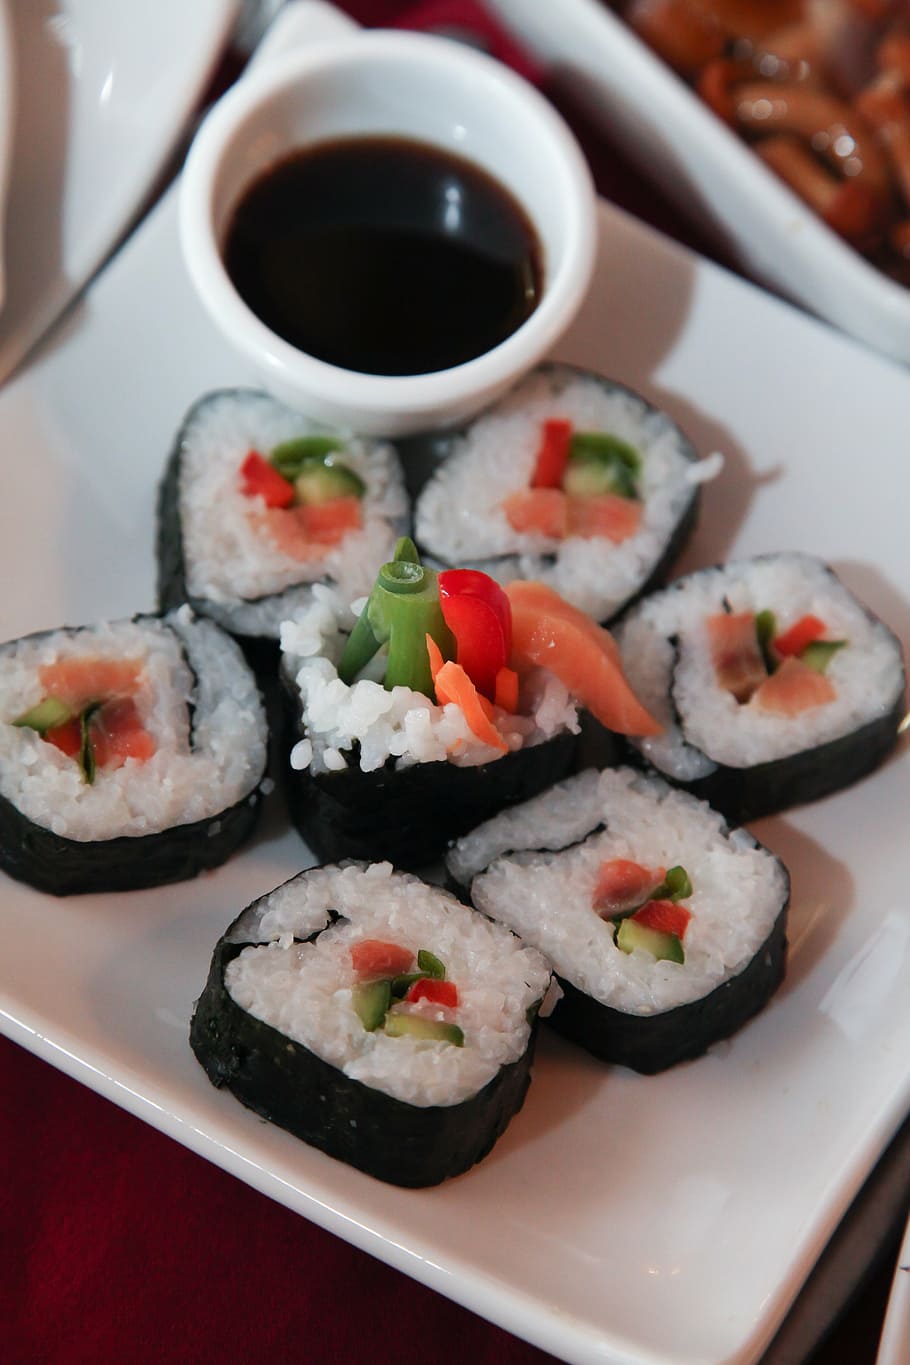 sushi, japanese restaurant, sauce, food and drink, asian food, japanese food, seafood, rice, healthy eating, ready-to-eat